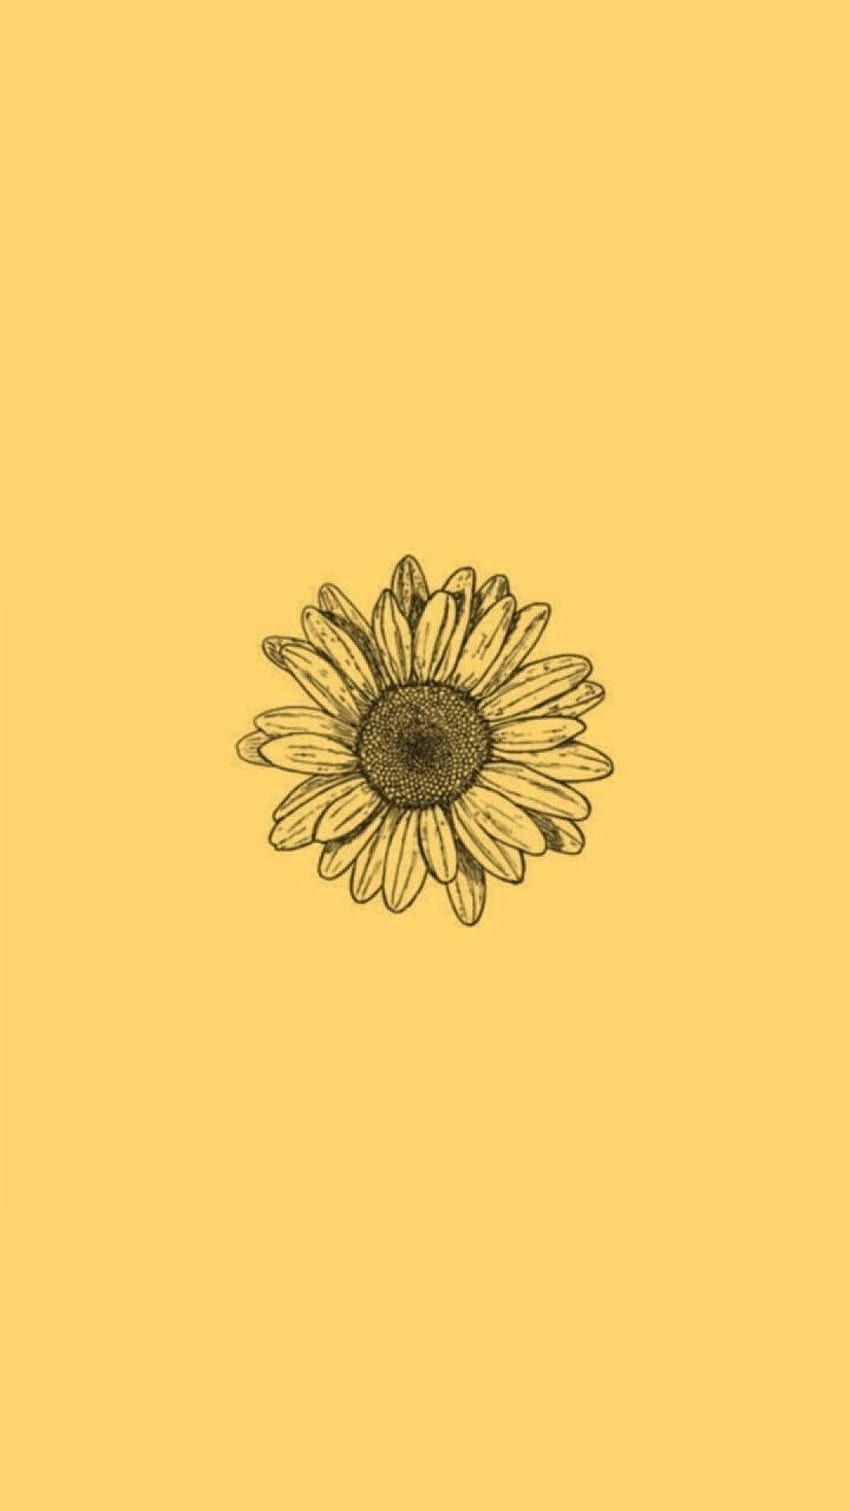 Yellow aesthetic wallpaper with a sunflower - Phone